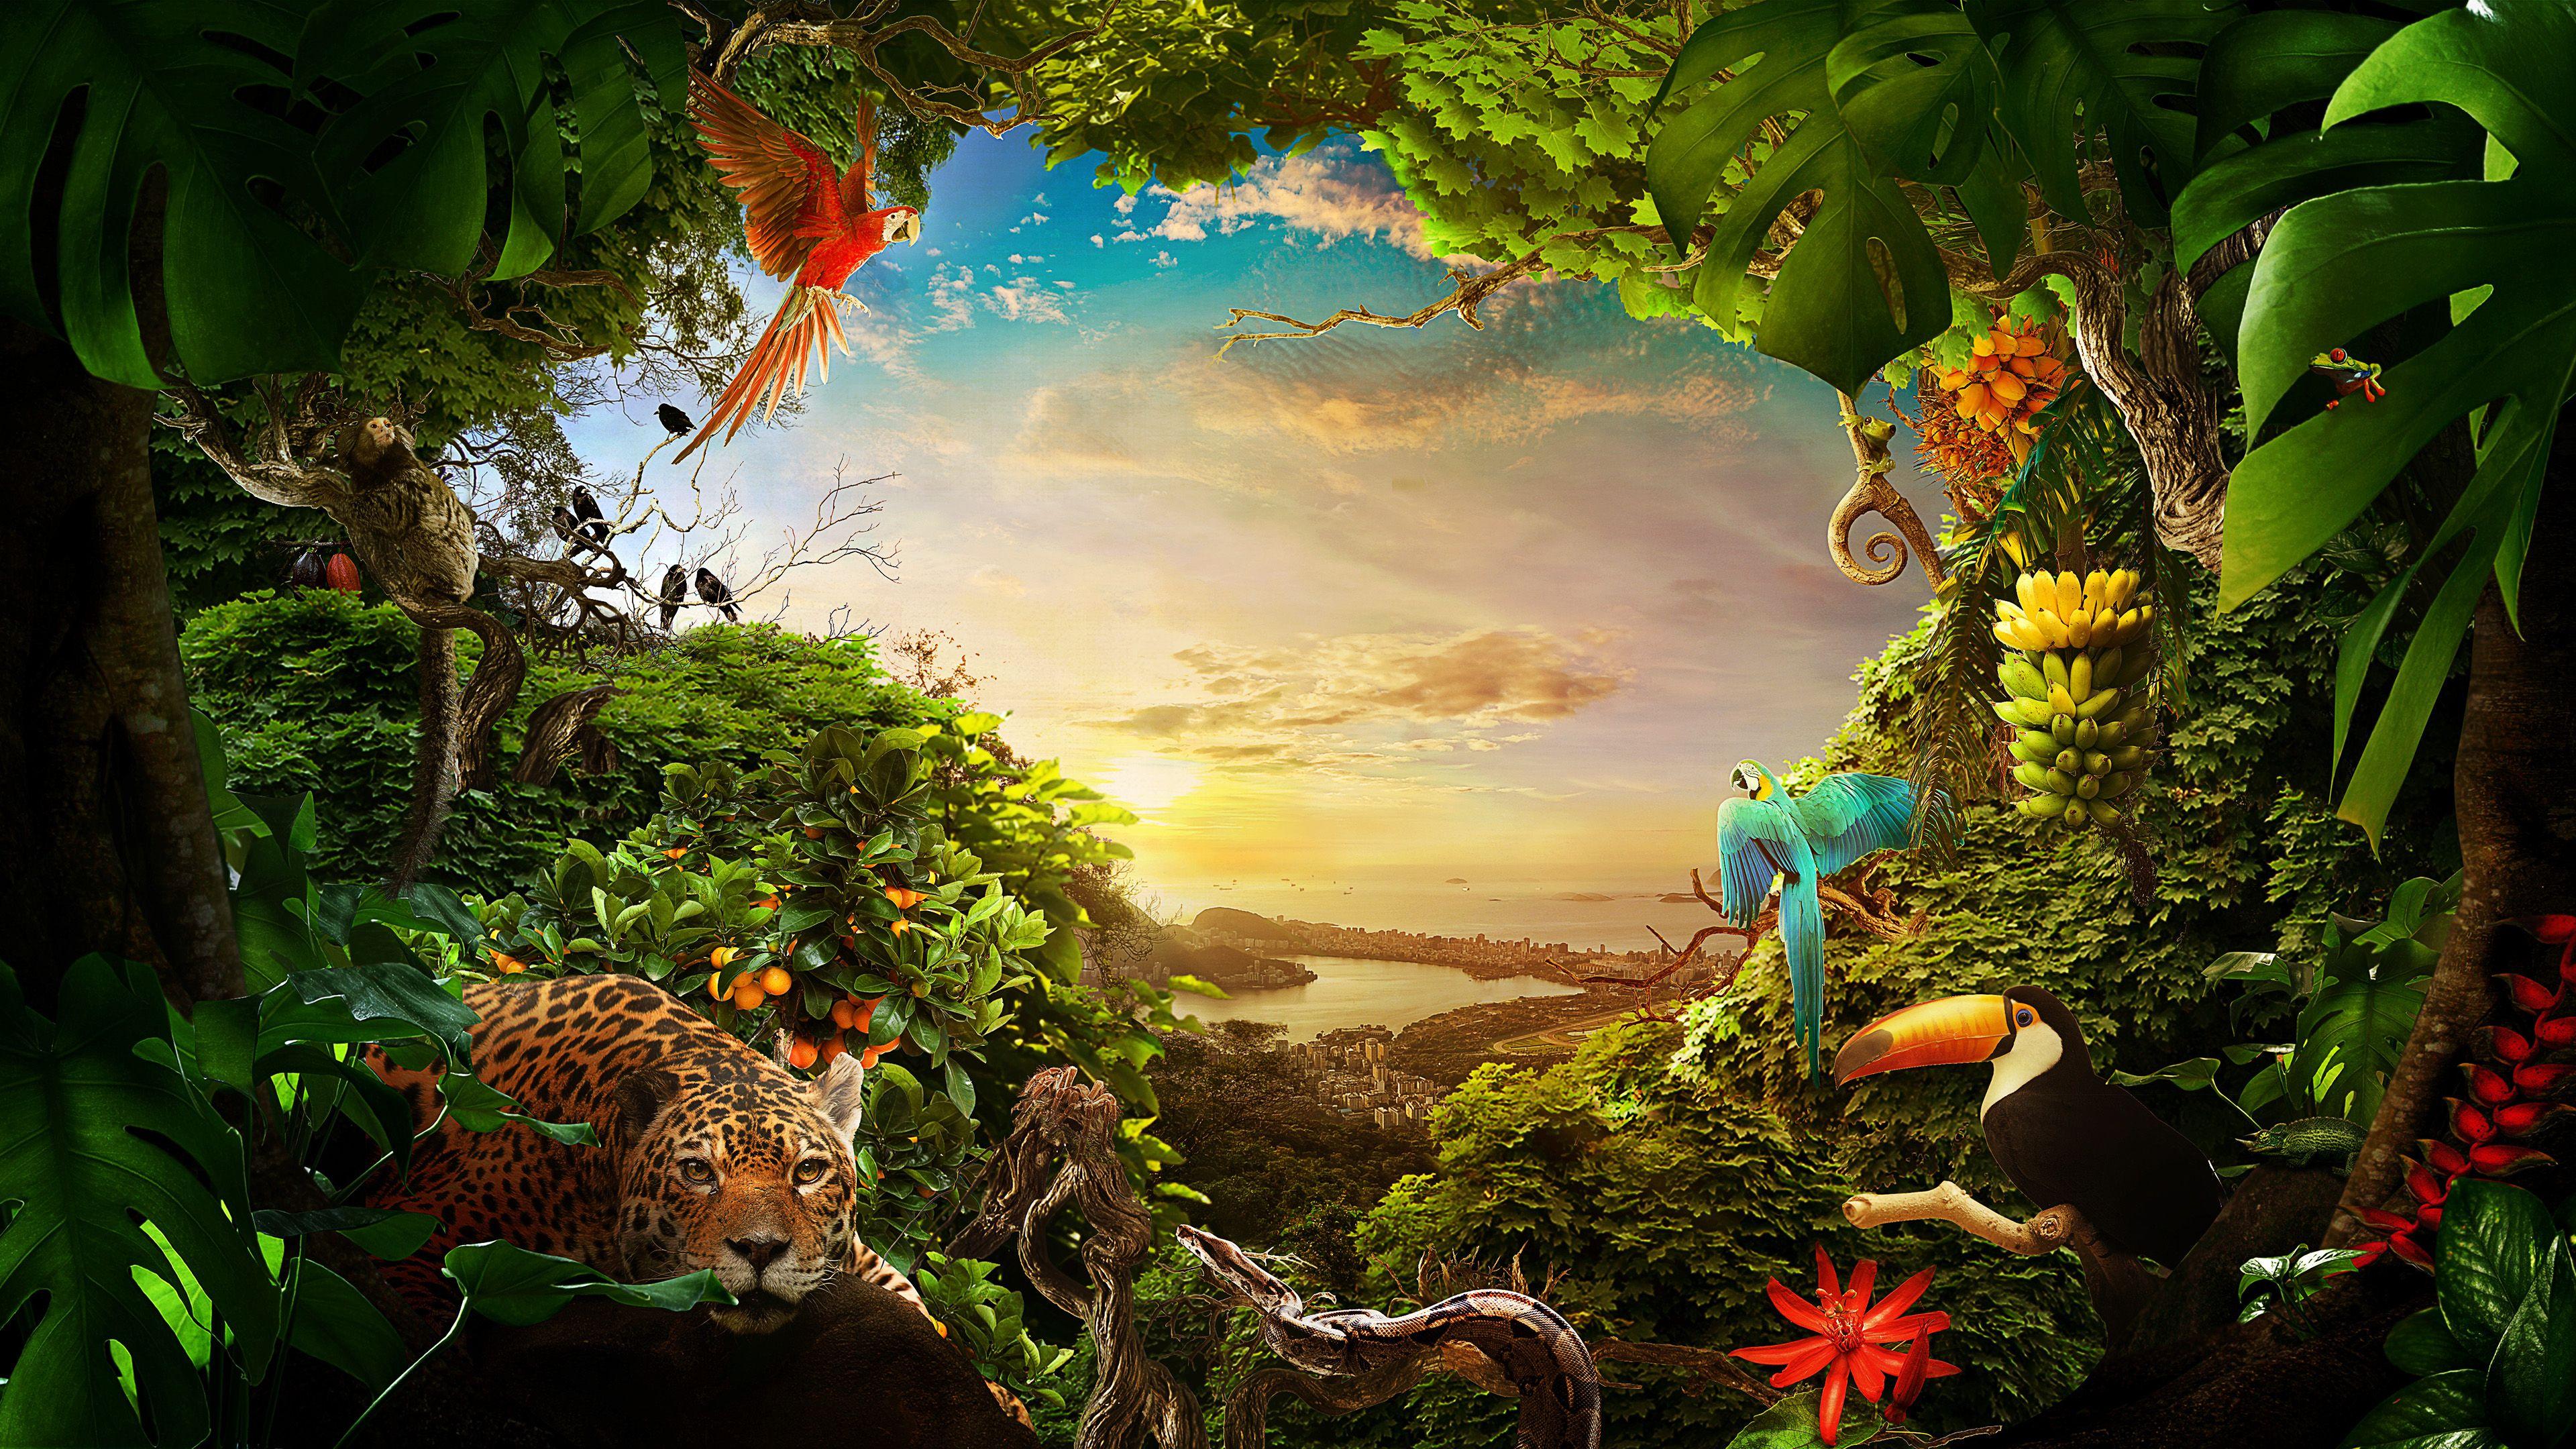 Forest Wildlife Wallpapers - Top Free Forest Wildlife Backgrounds